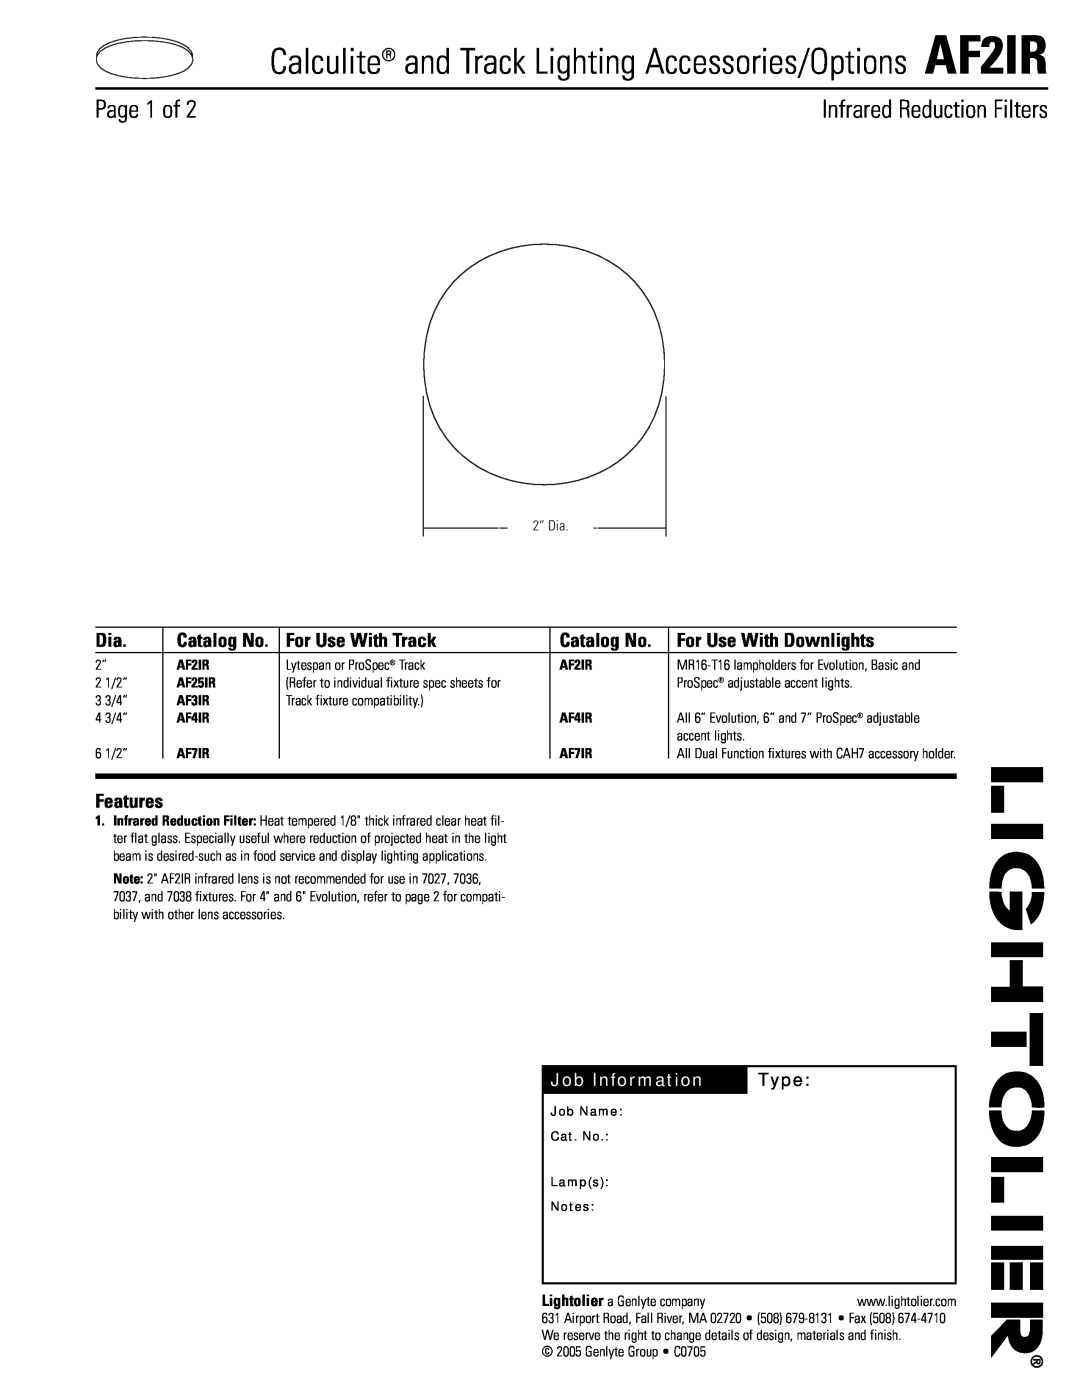 Lightolier AF2IR manual Infrared Reduction Filters, For Use With Track, Catalog No, For Use With Downlights, Features 